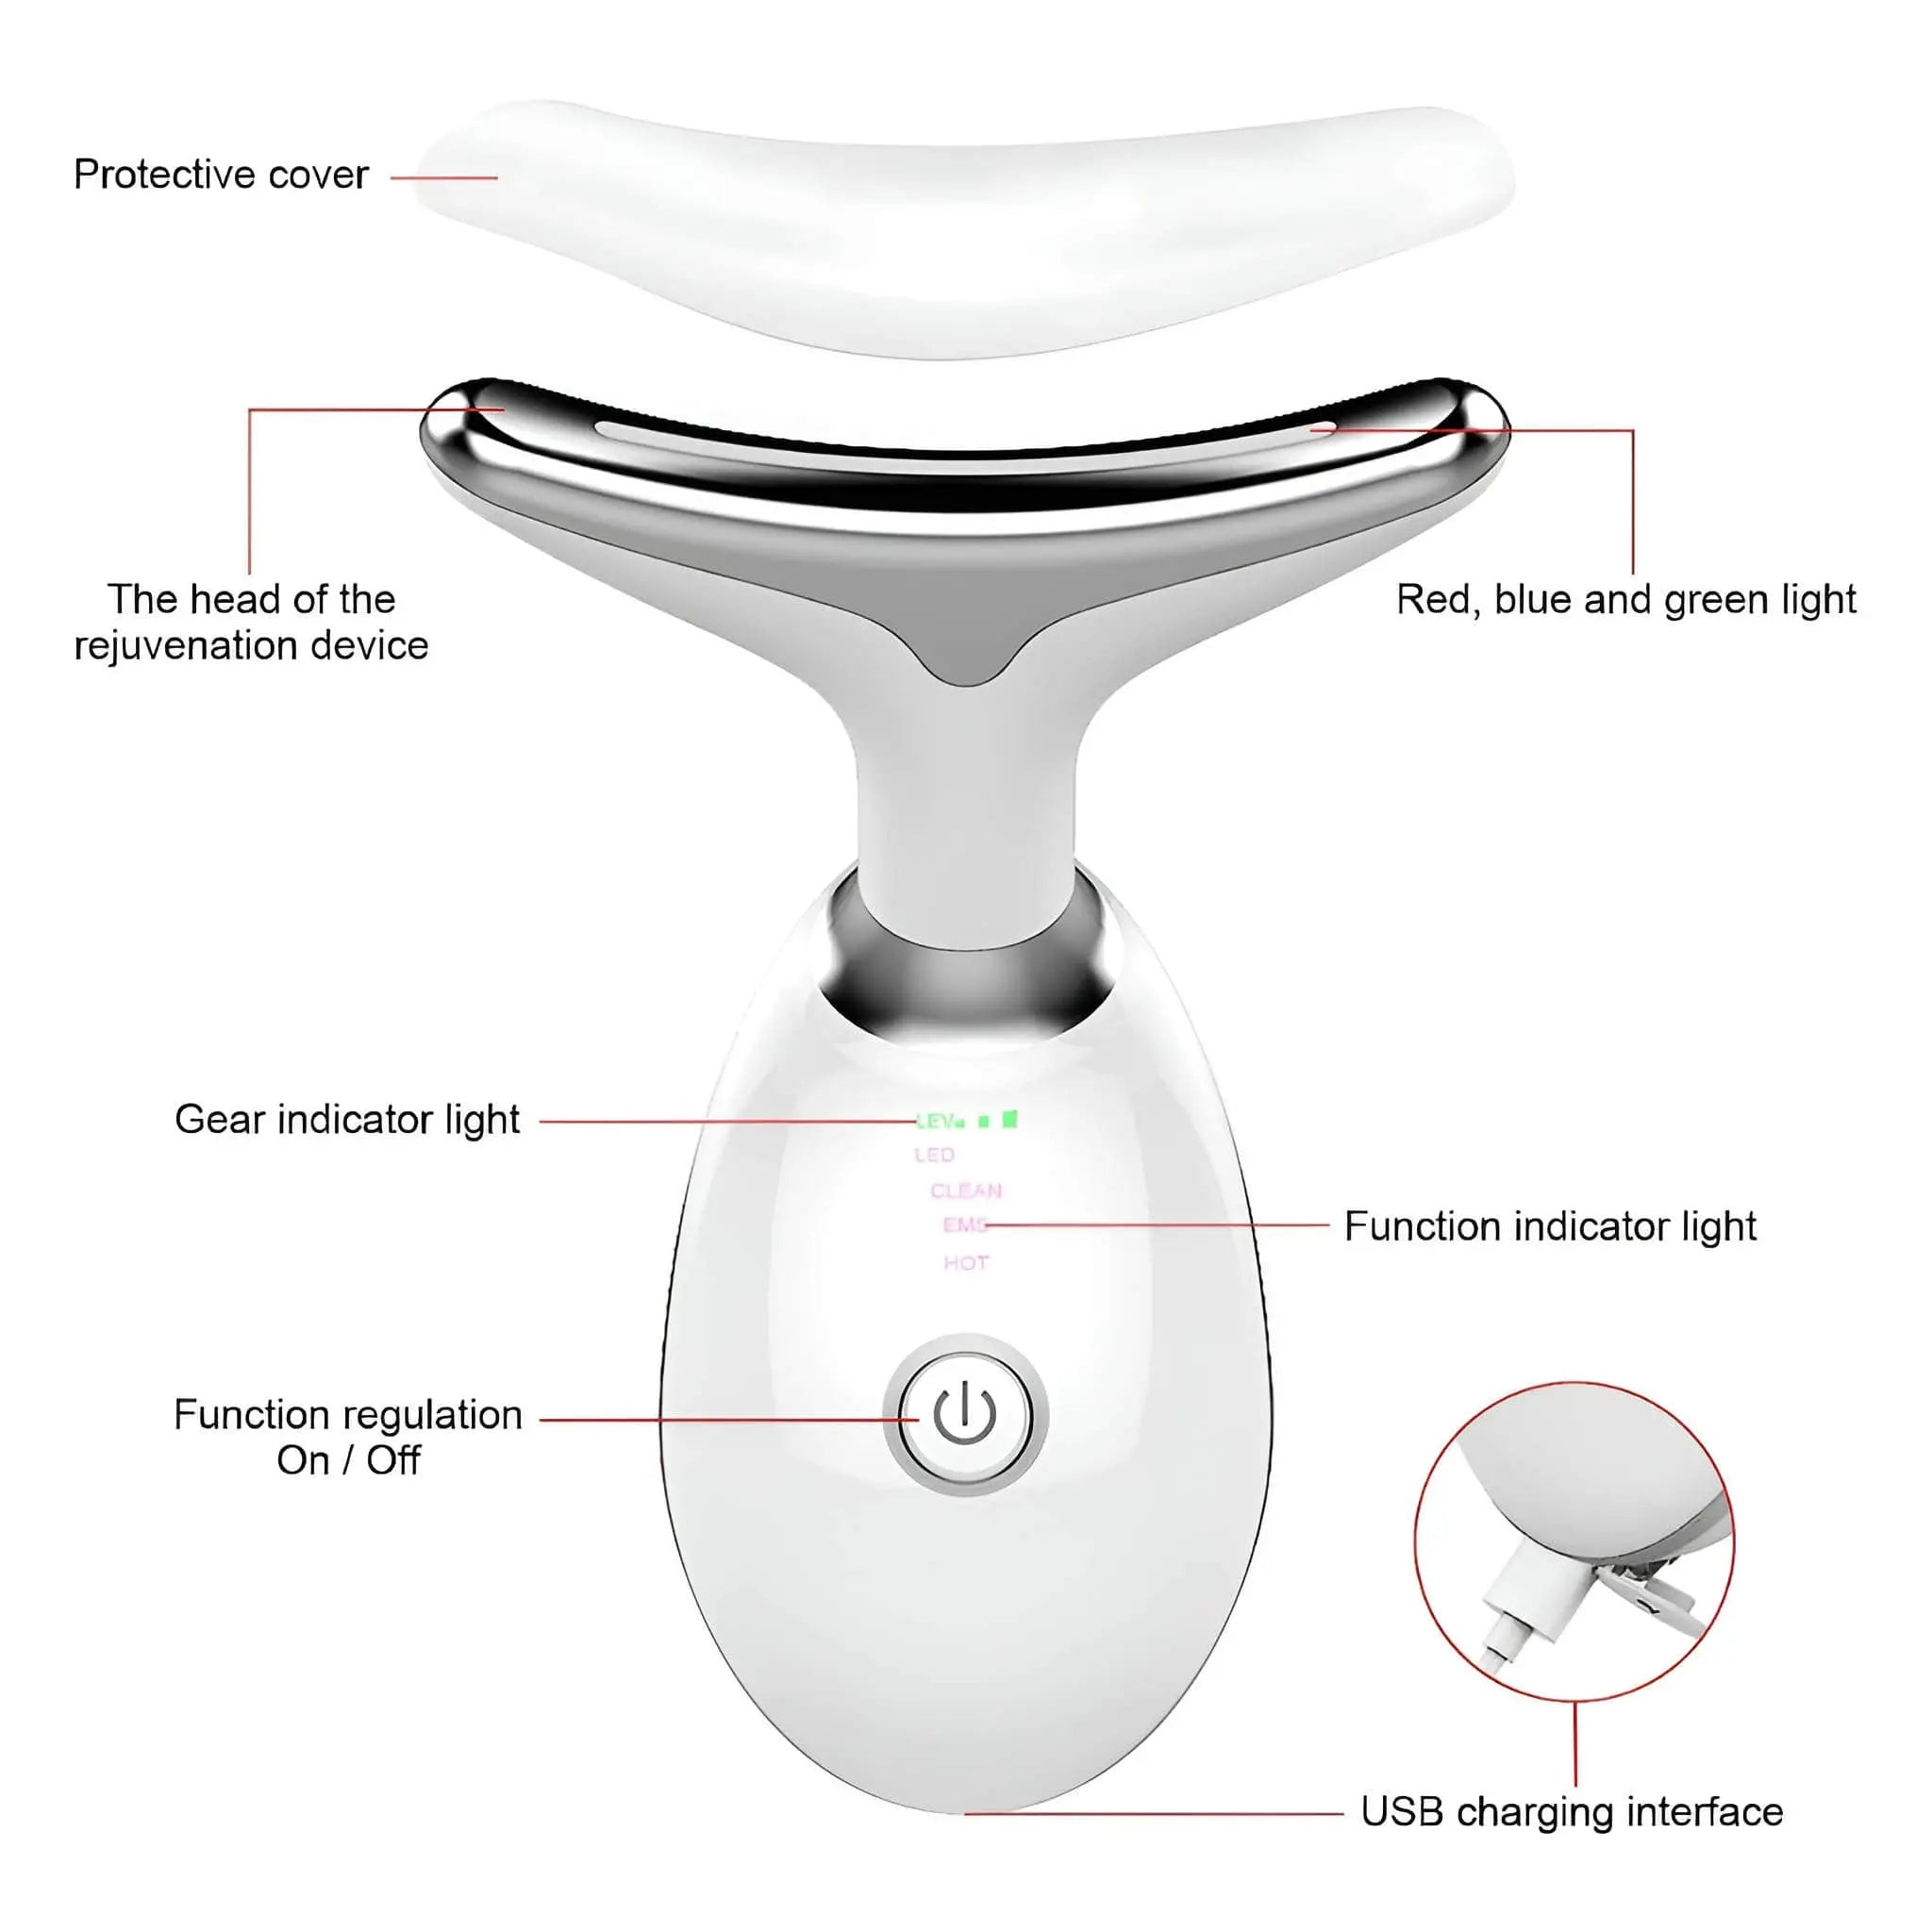 Anti Wrinkles Face Massager for Neck and Face Sculpting Great For Anti-Aging